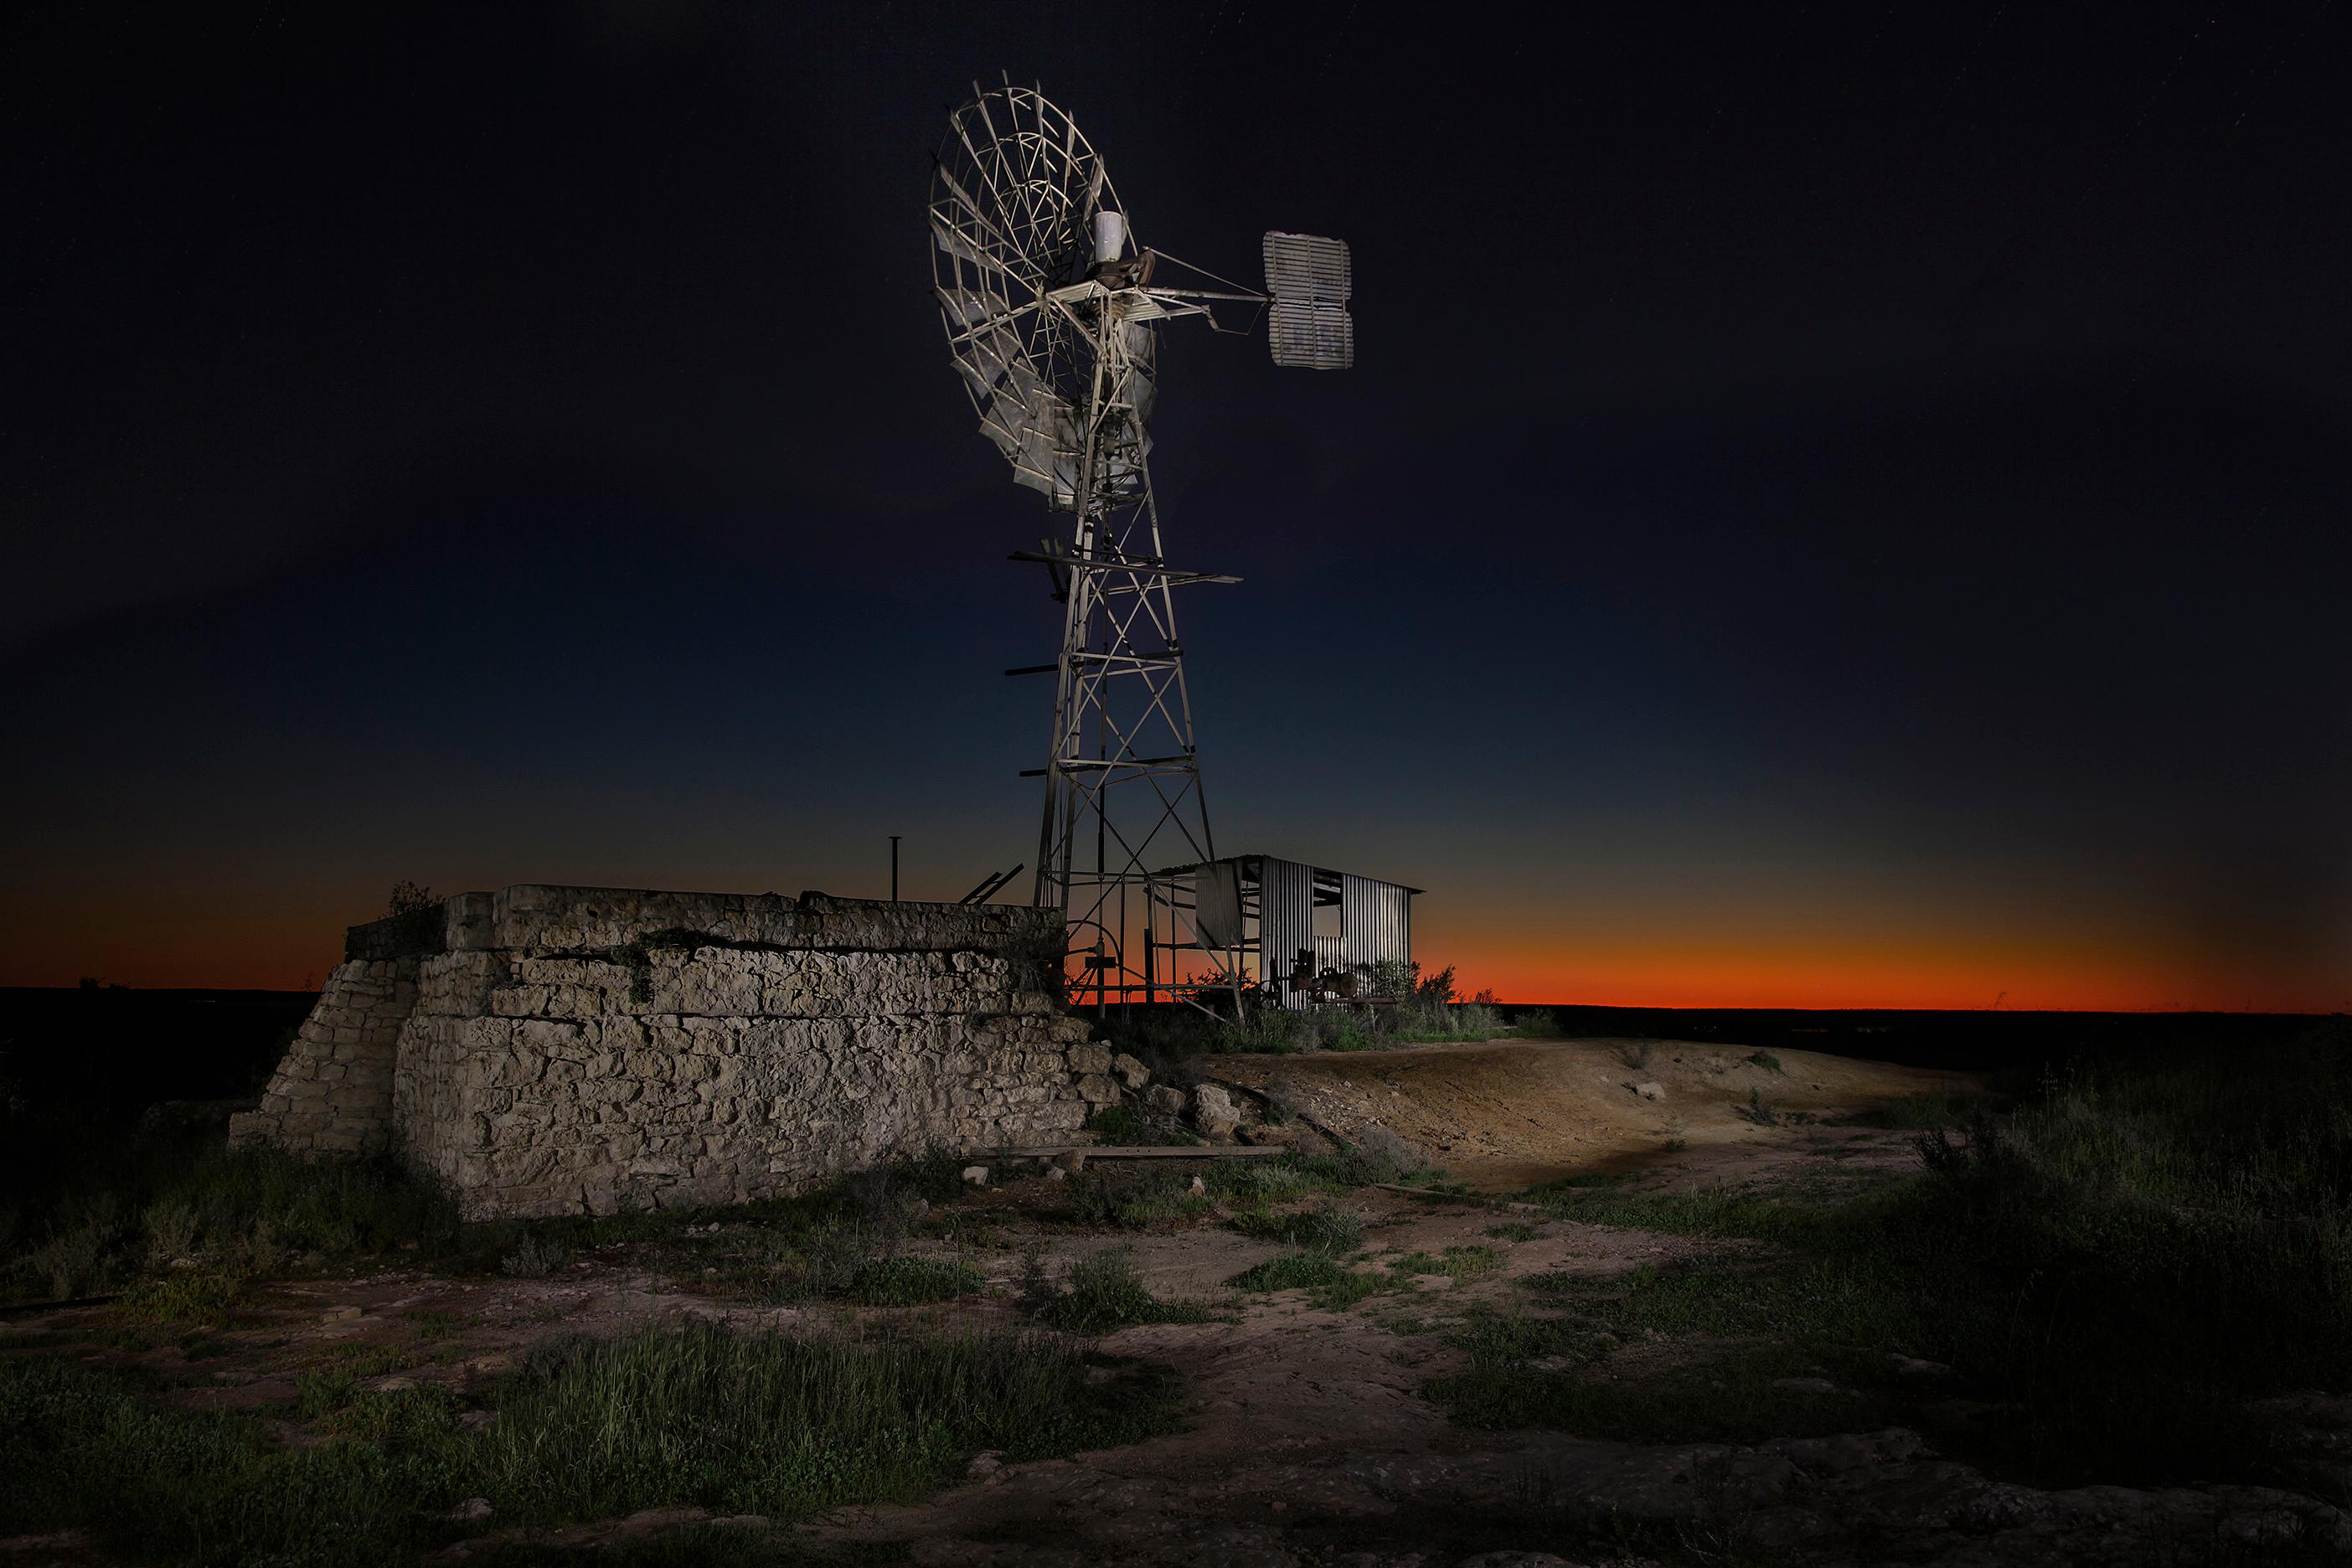 Light painting of a disused windmill on an abandoned farm situated on the edge of the Nullarbor desert. Foto: Zol Straub, Australia, Shortlist, Low Light, Open, 2015 Sony World Photography Awards